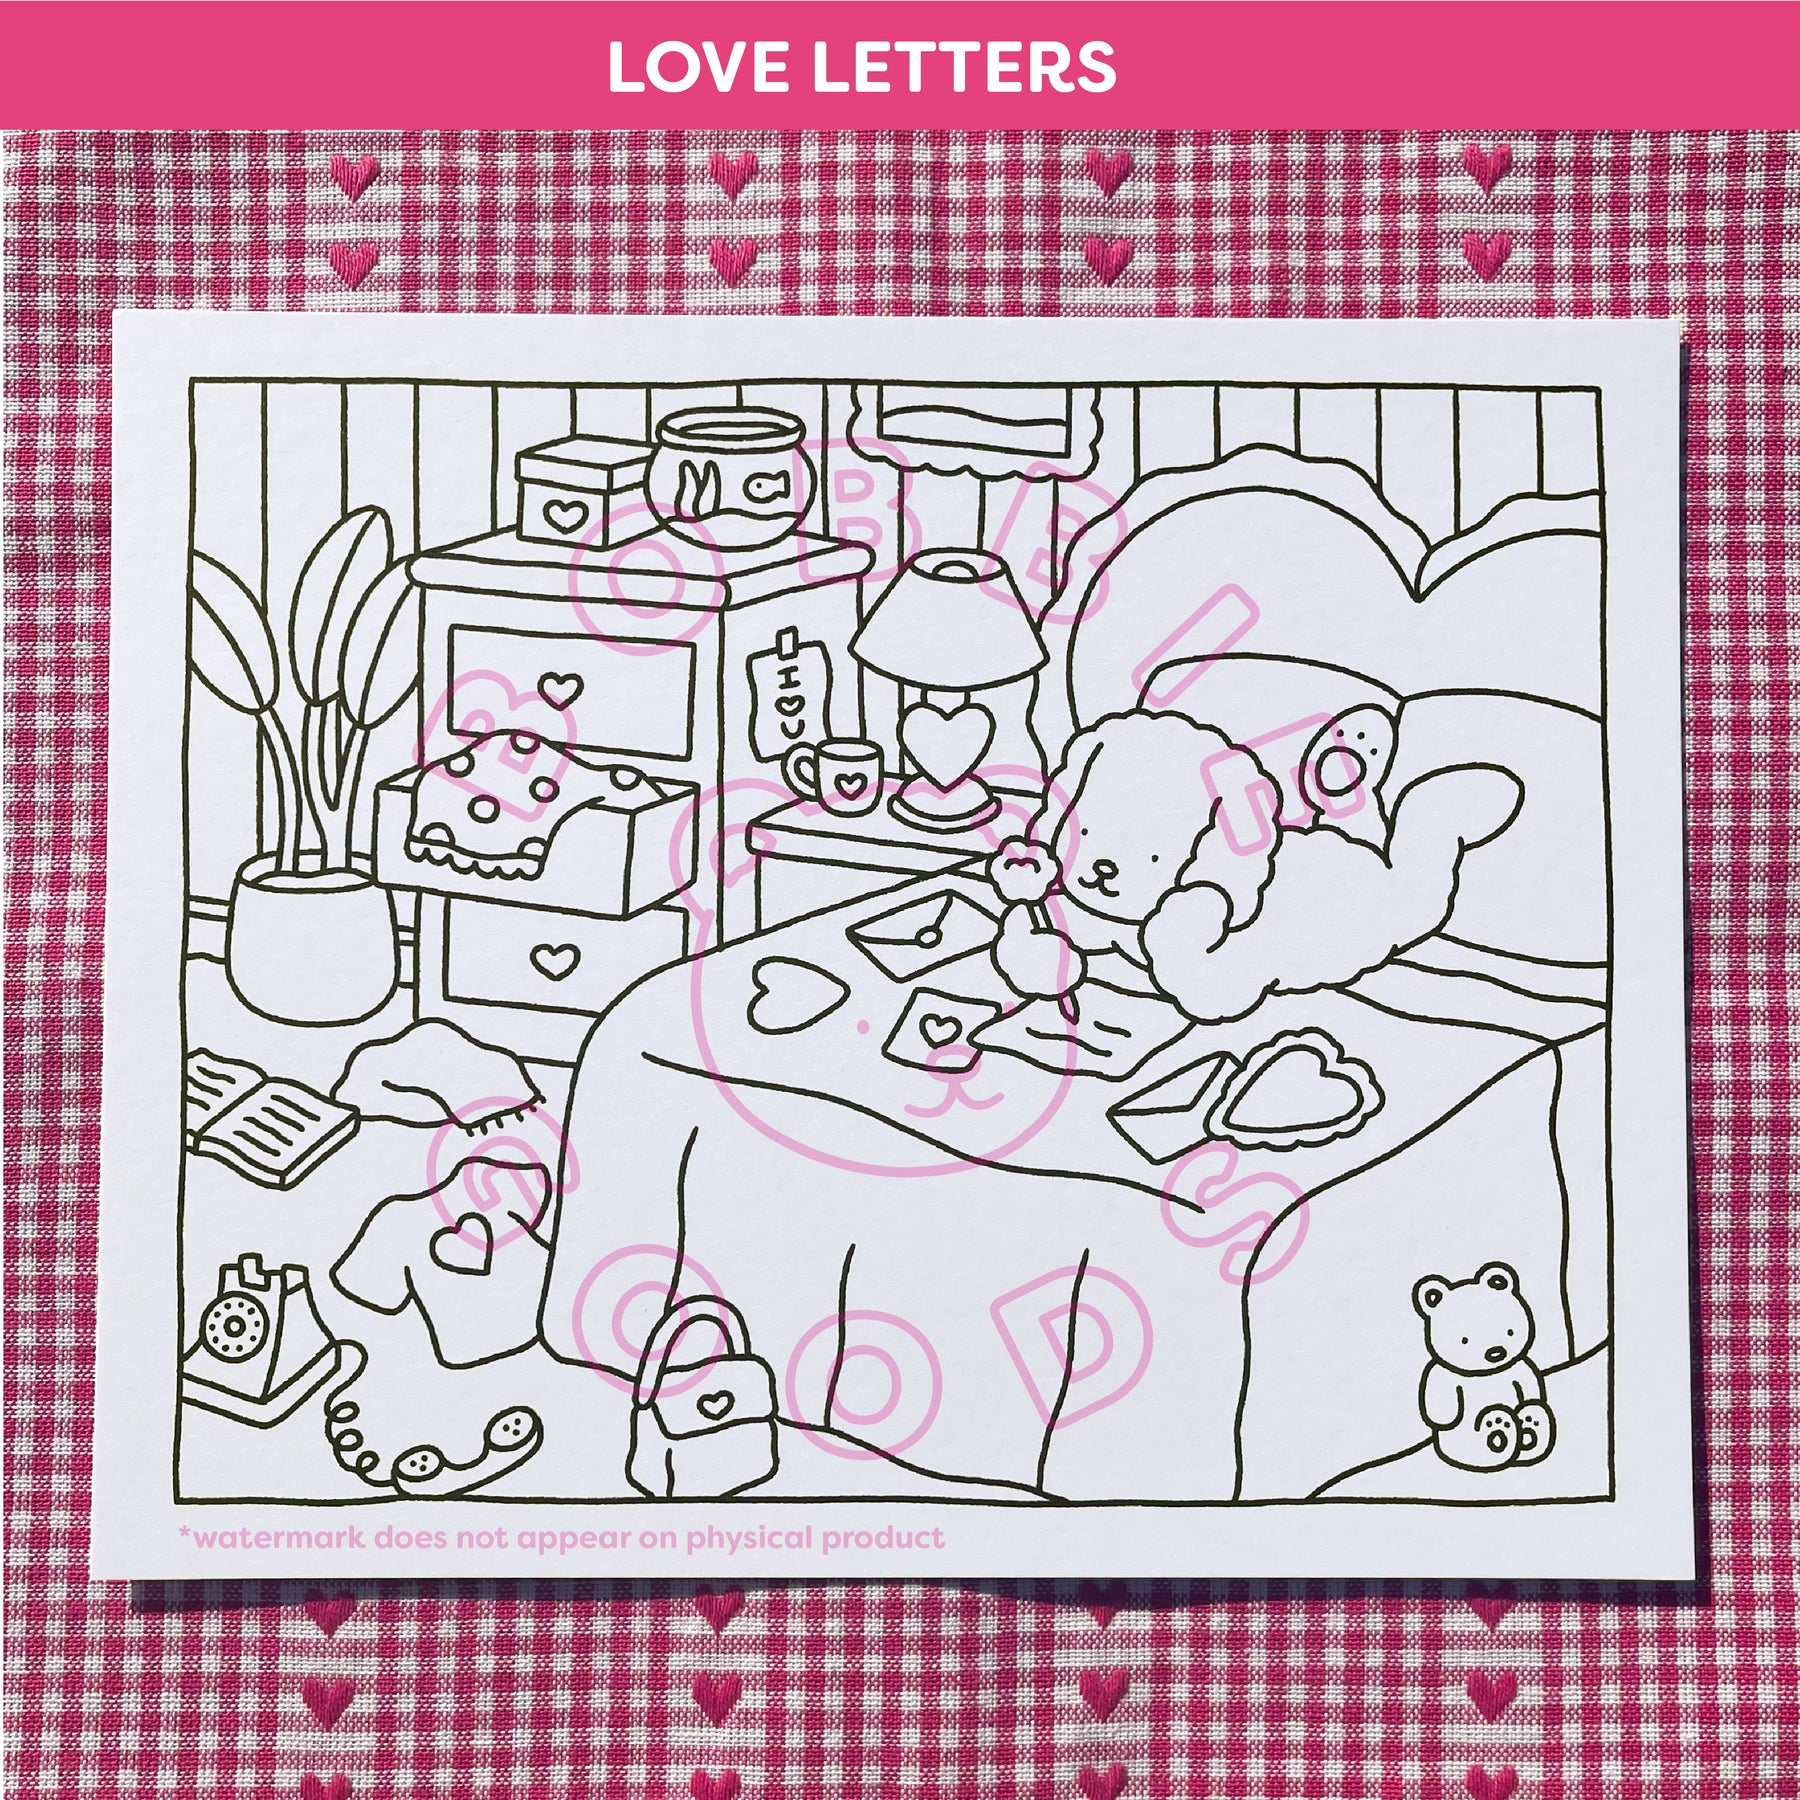 Sweetheart Coloring Sheets • Pack of 6 – Bobbie Goods